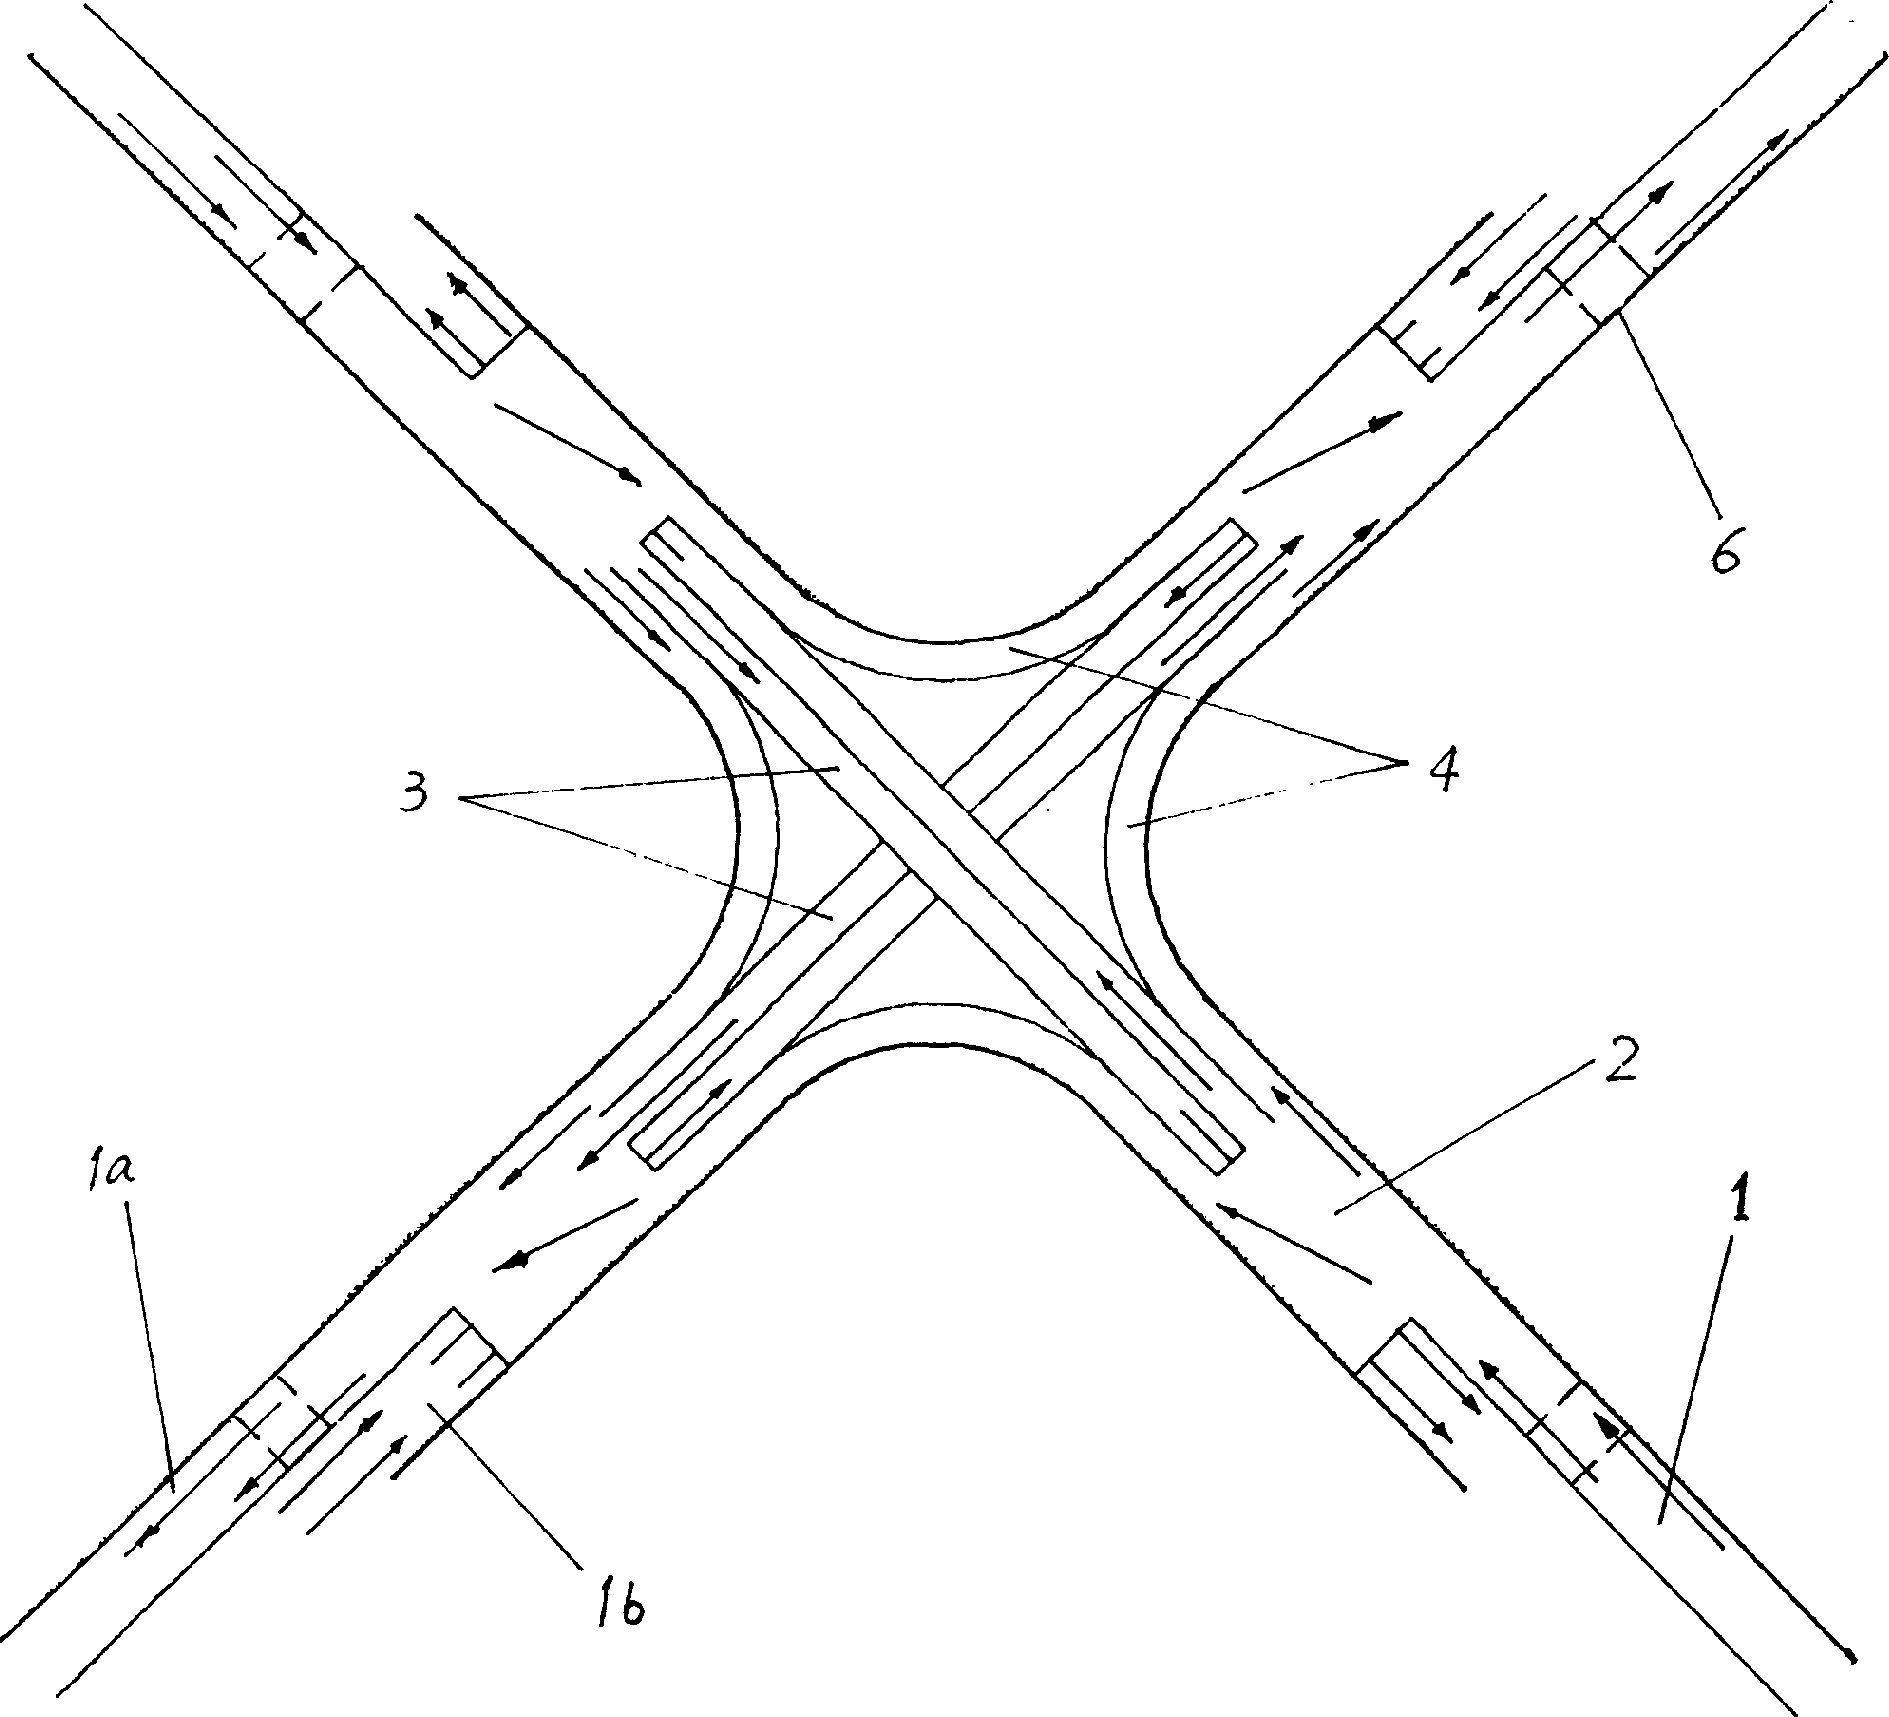 Two-deck full-directional direct-intercommunity overpass